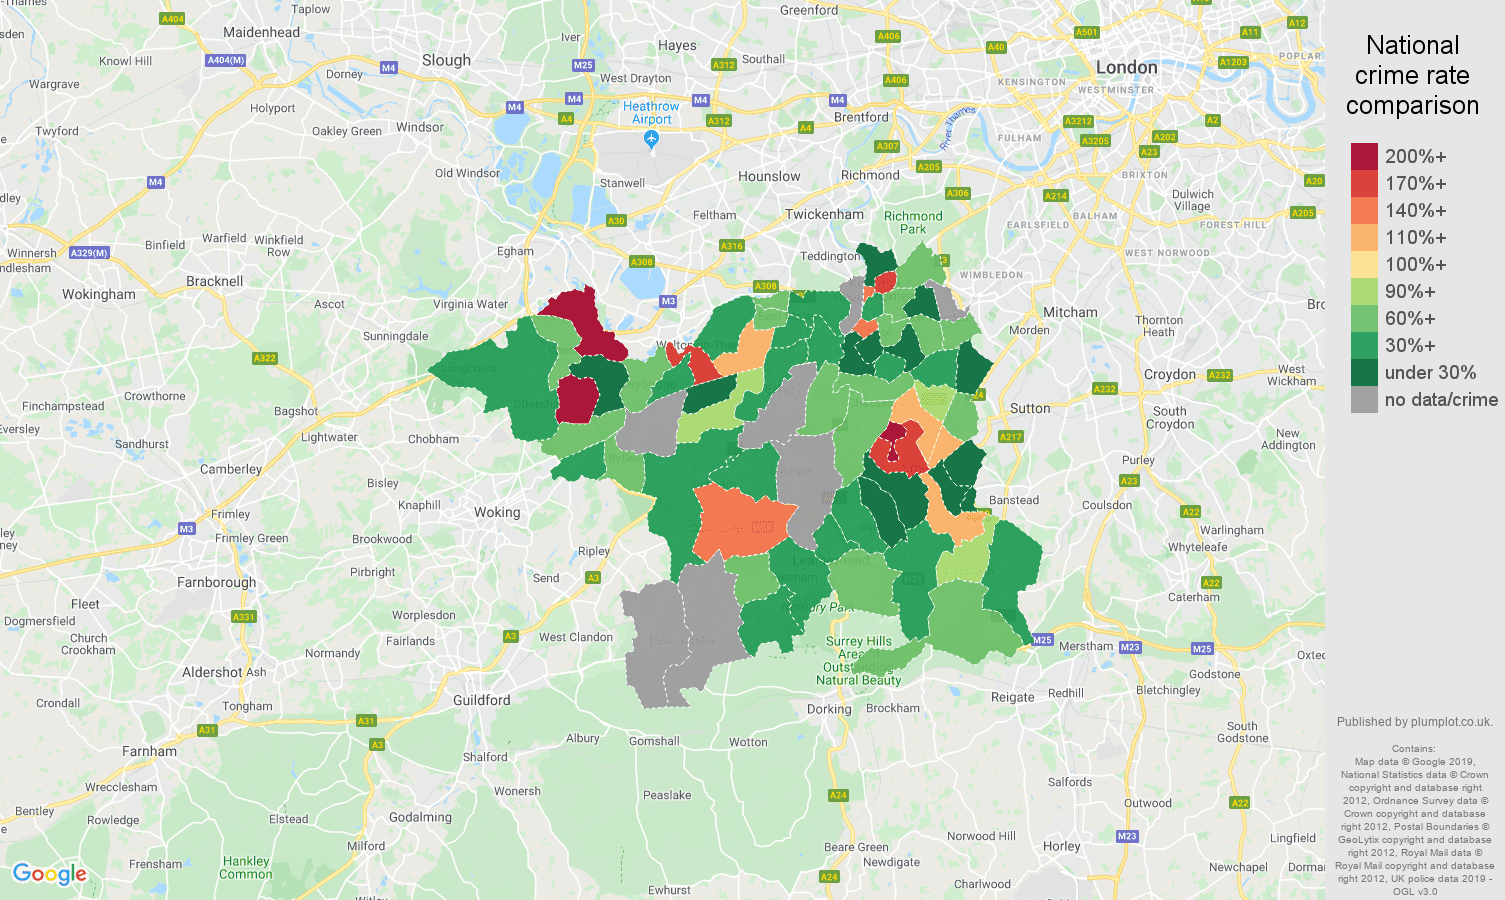 Kingston upon Thames possession of weapons crime rate comparison map